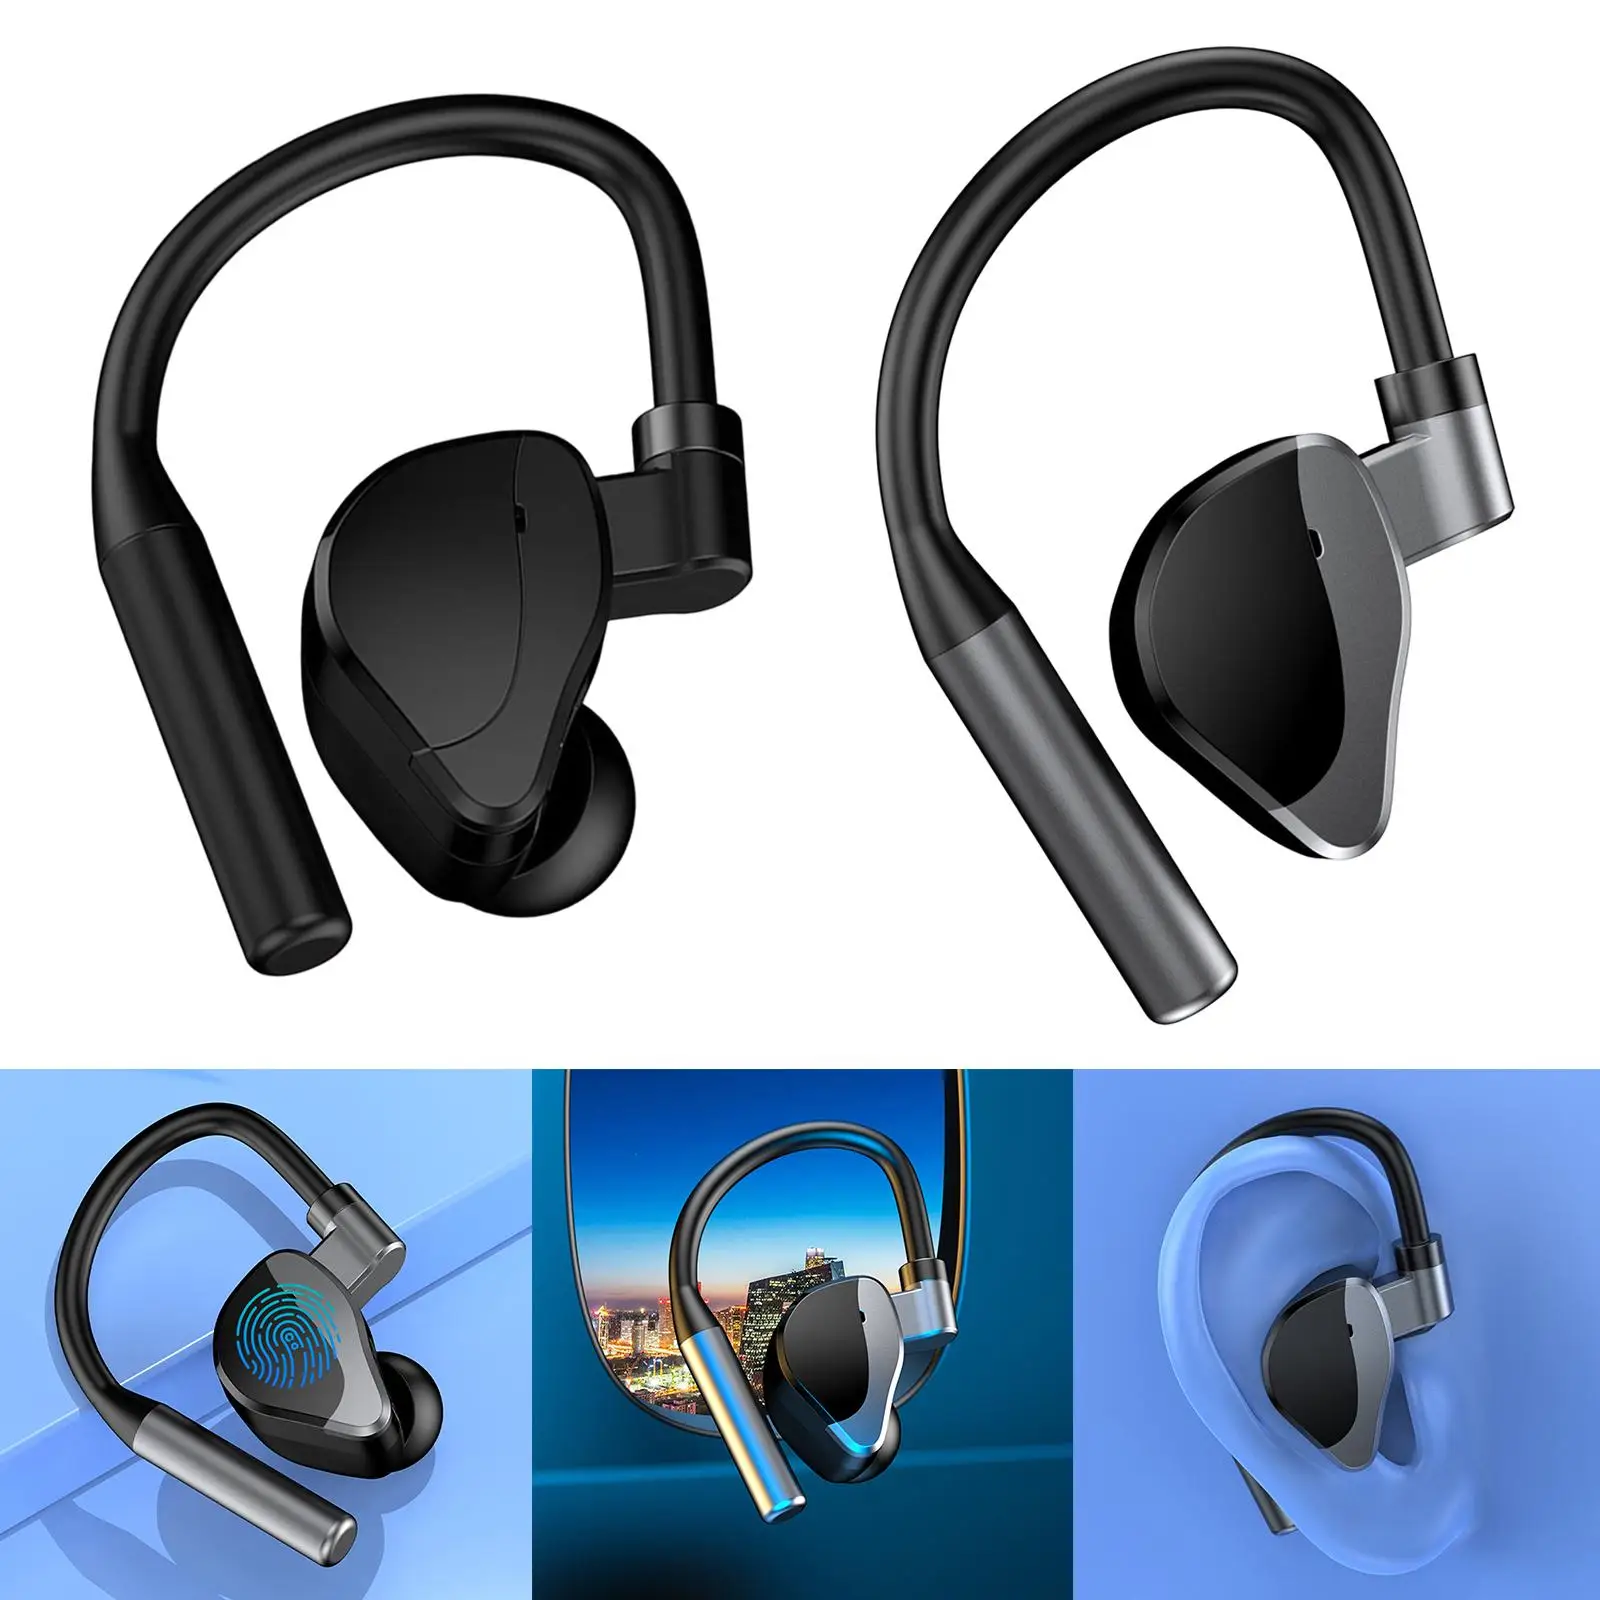 Business Headset Low Latency Calling HiFi Earbuds Headphones for Workout